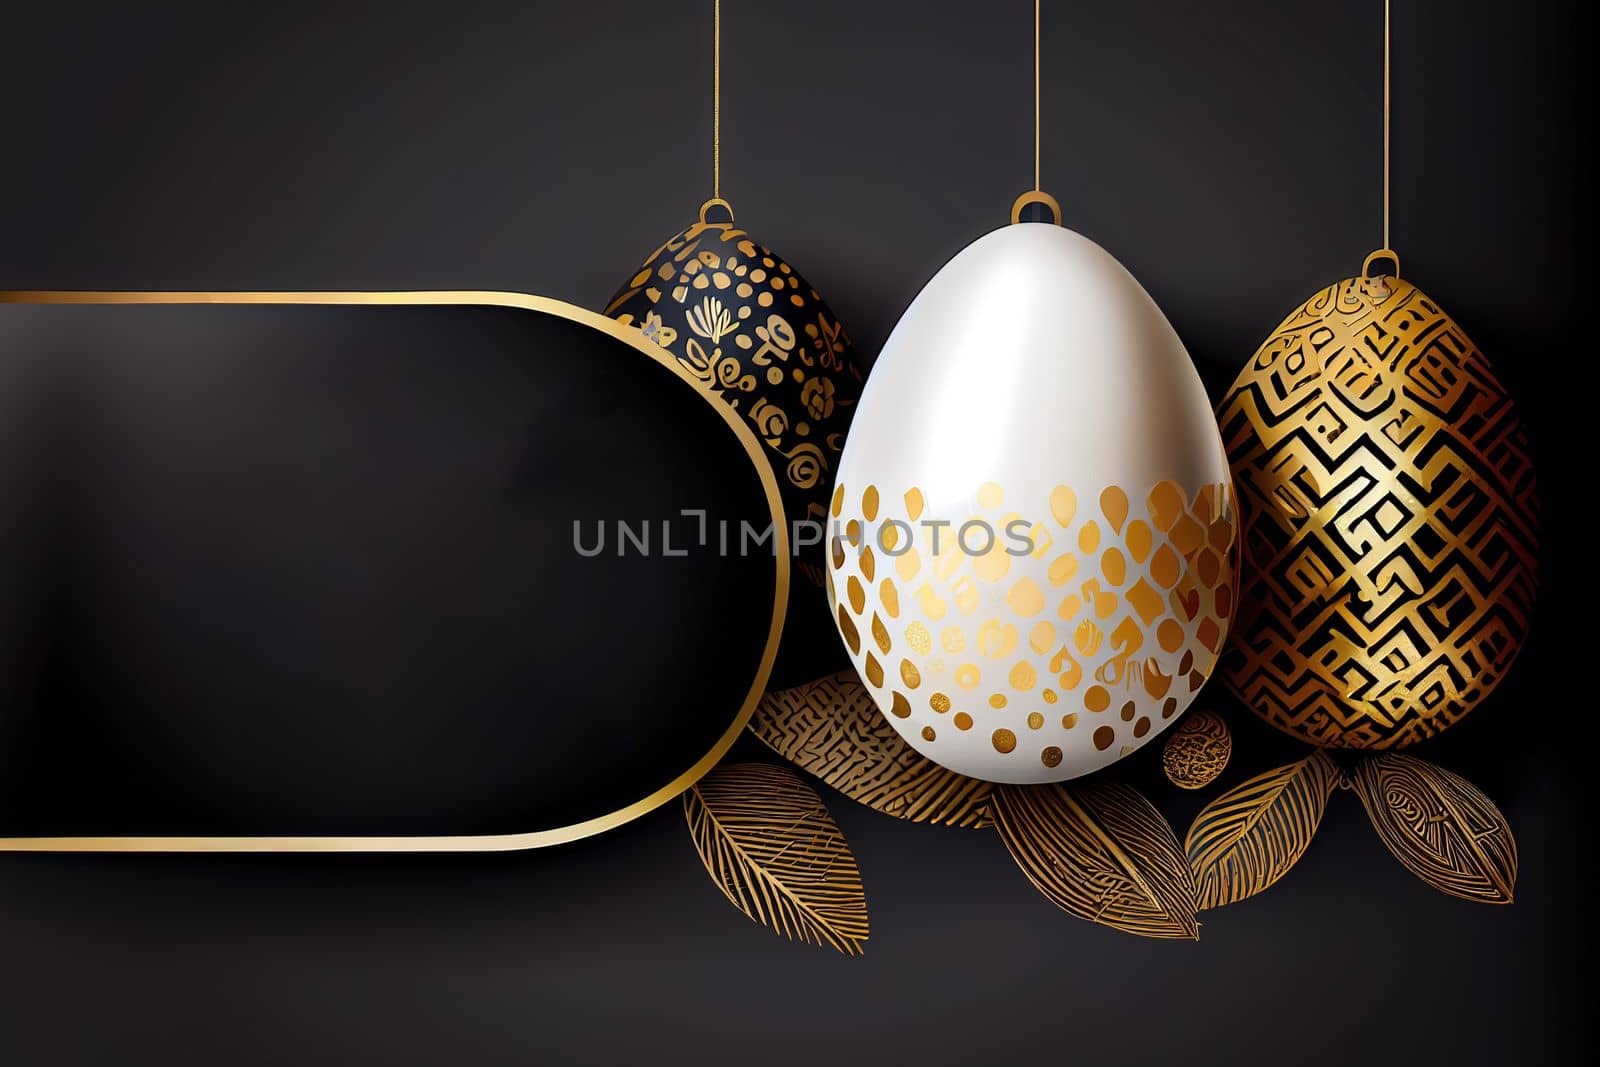 3D render of Easter egg sale banner with gold and white realistic eggs hanging on a thread, golden ornate designs on a black modern background with place for text.